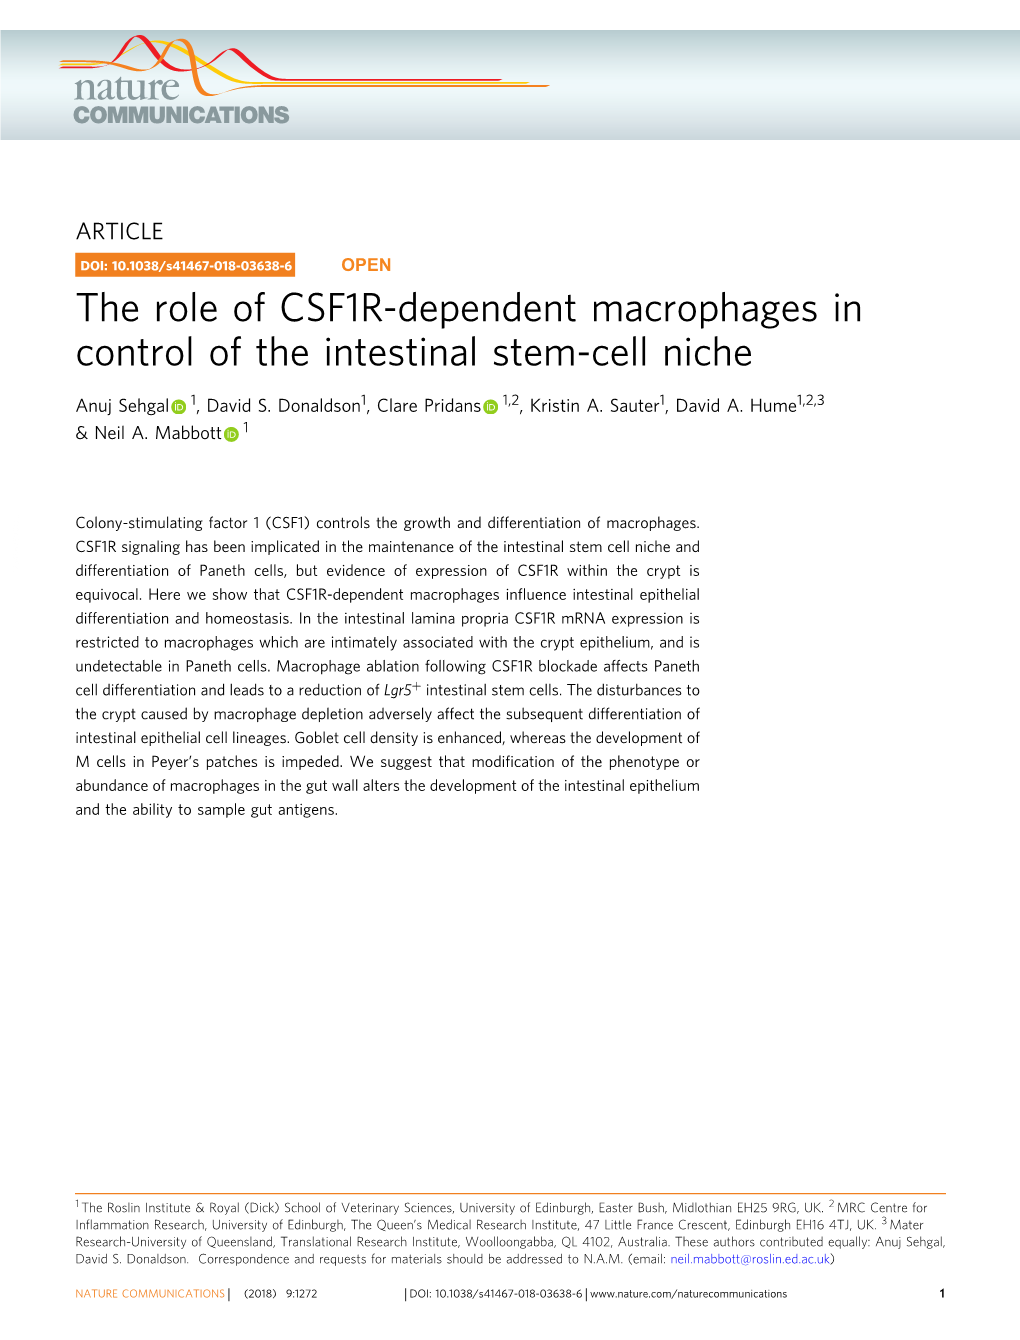 The Role of CSF1R-Dependent Macrophages in Control of the Intestinal Stem-Cell Niche